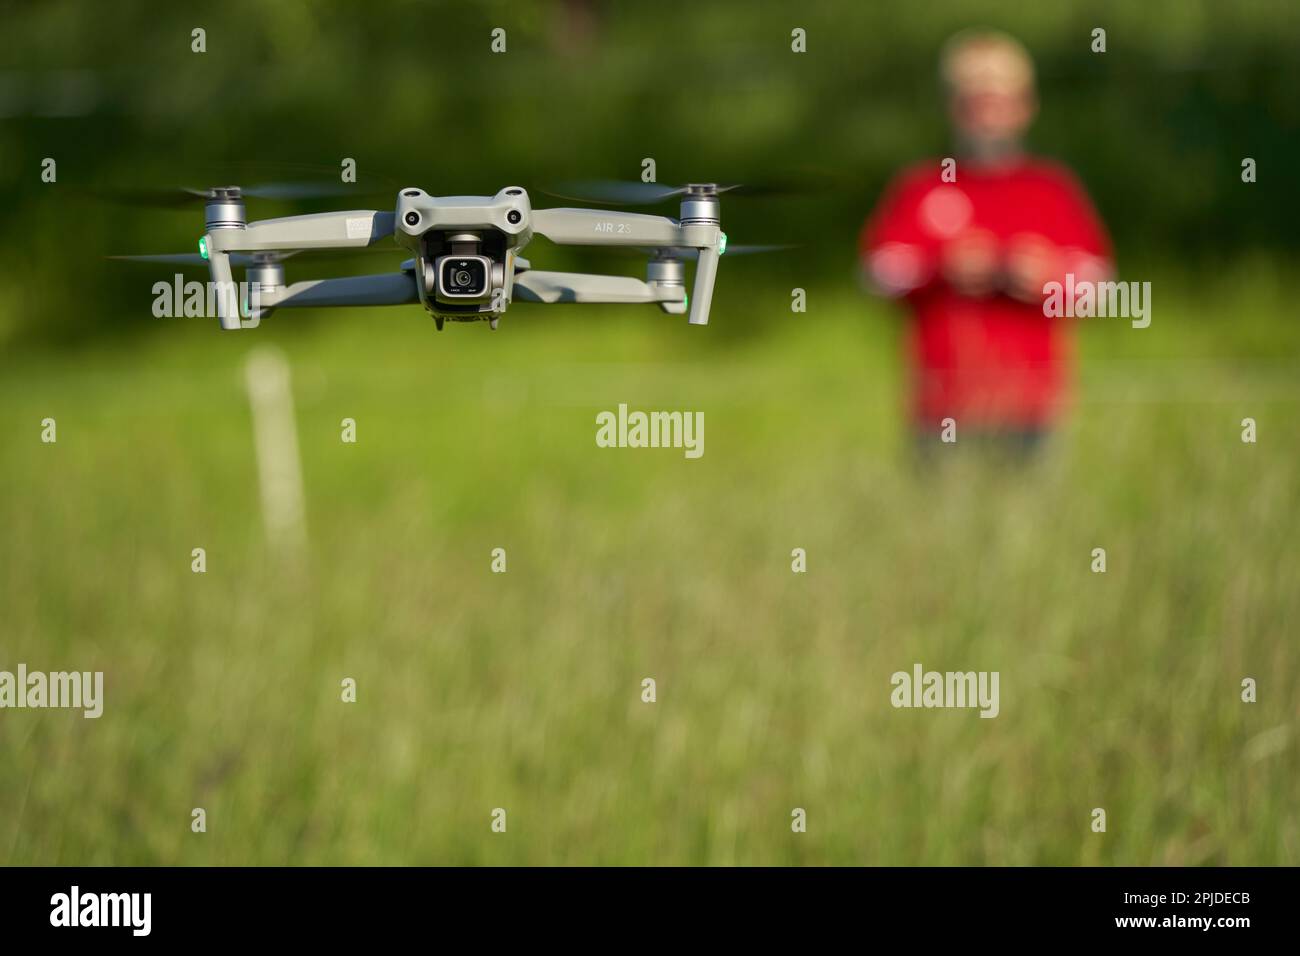 Nürtingen, Germany - May 29, 2021: Dji air 2s drone, with camera sensors and many safety features. 1' large camera sensor plus air sense and ads-b tec Stock Photo